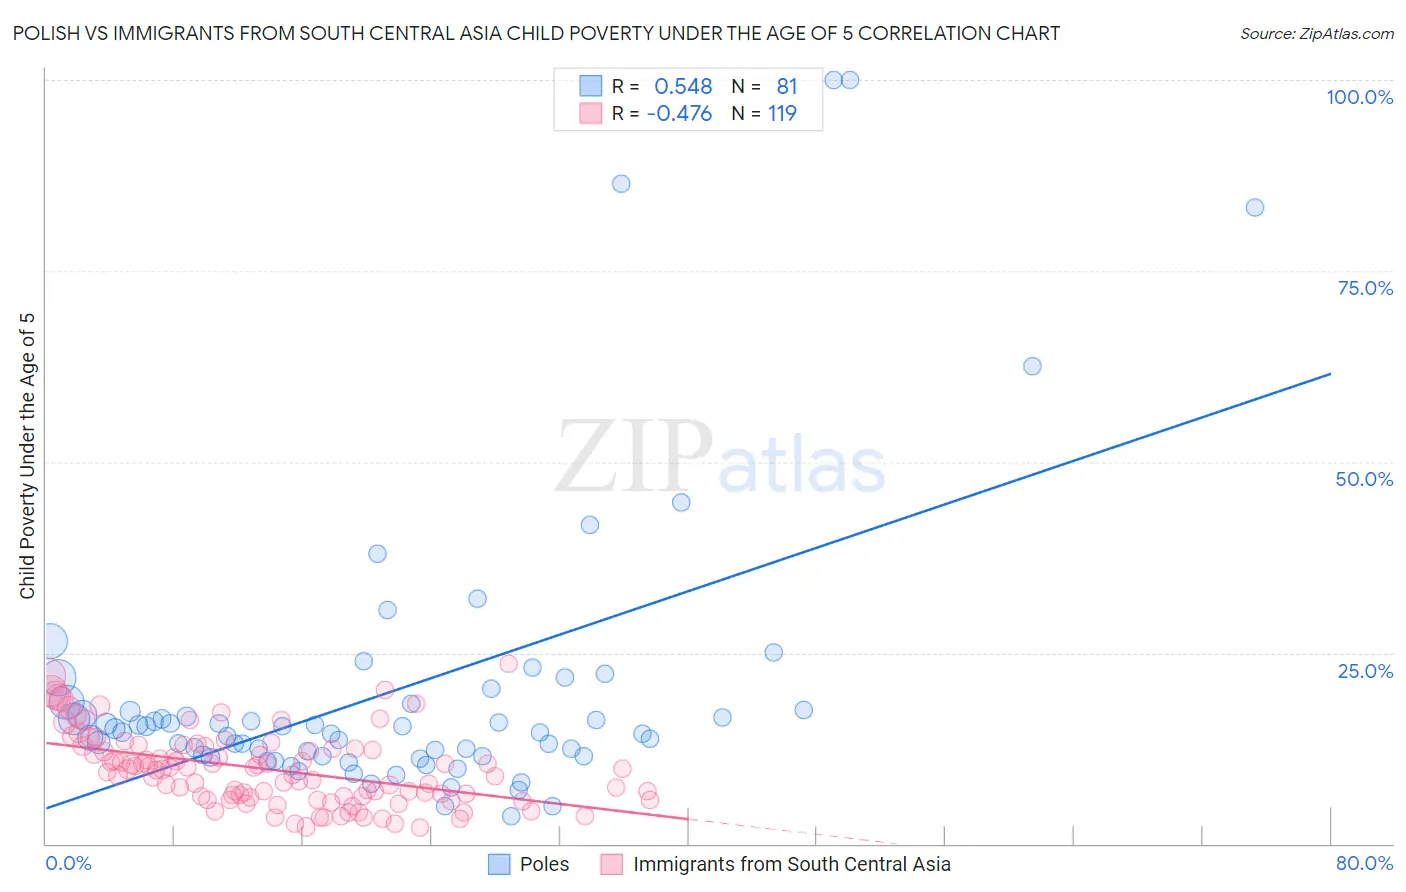 Polish vs Immigrants from South Central Asia Child Poverty Under the Age of 5